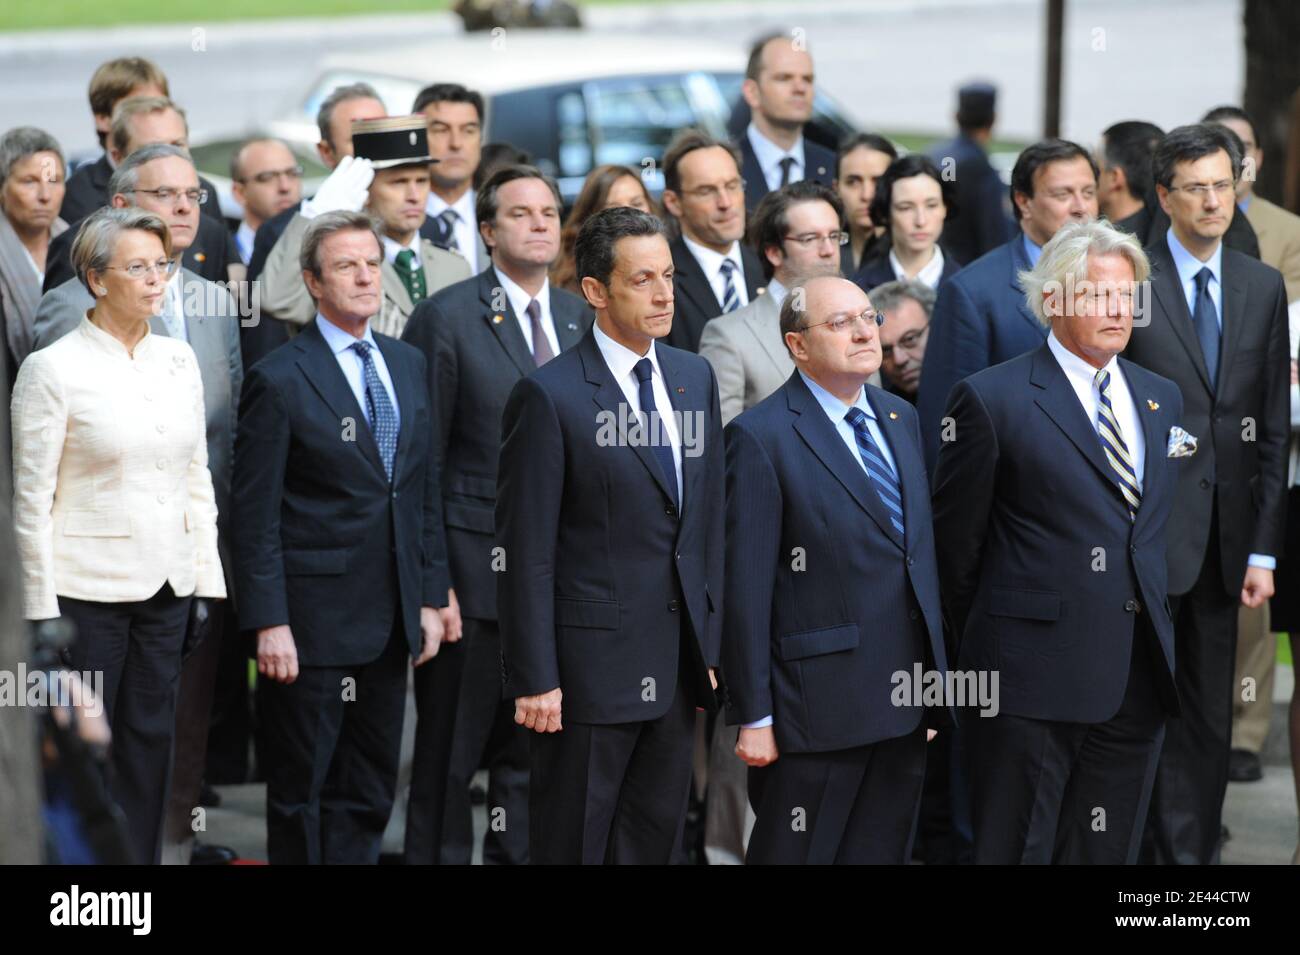 (1st round) French President Nicolas Sarkozy and French Ambassador in Spain Bruno Delaye, (2d round) French Interior Minister Michele Alliot-Marie, Foreign Minister Bernard Kouchner, Renaud Muselier attend a memory ceremony at Plaza de la Lealtad in Madrid, Spain on April 28, 2009. Photo by Witt-Niviere/Pool/ABACAPRESS.COM Stock Photo